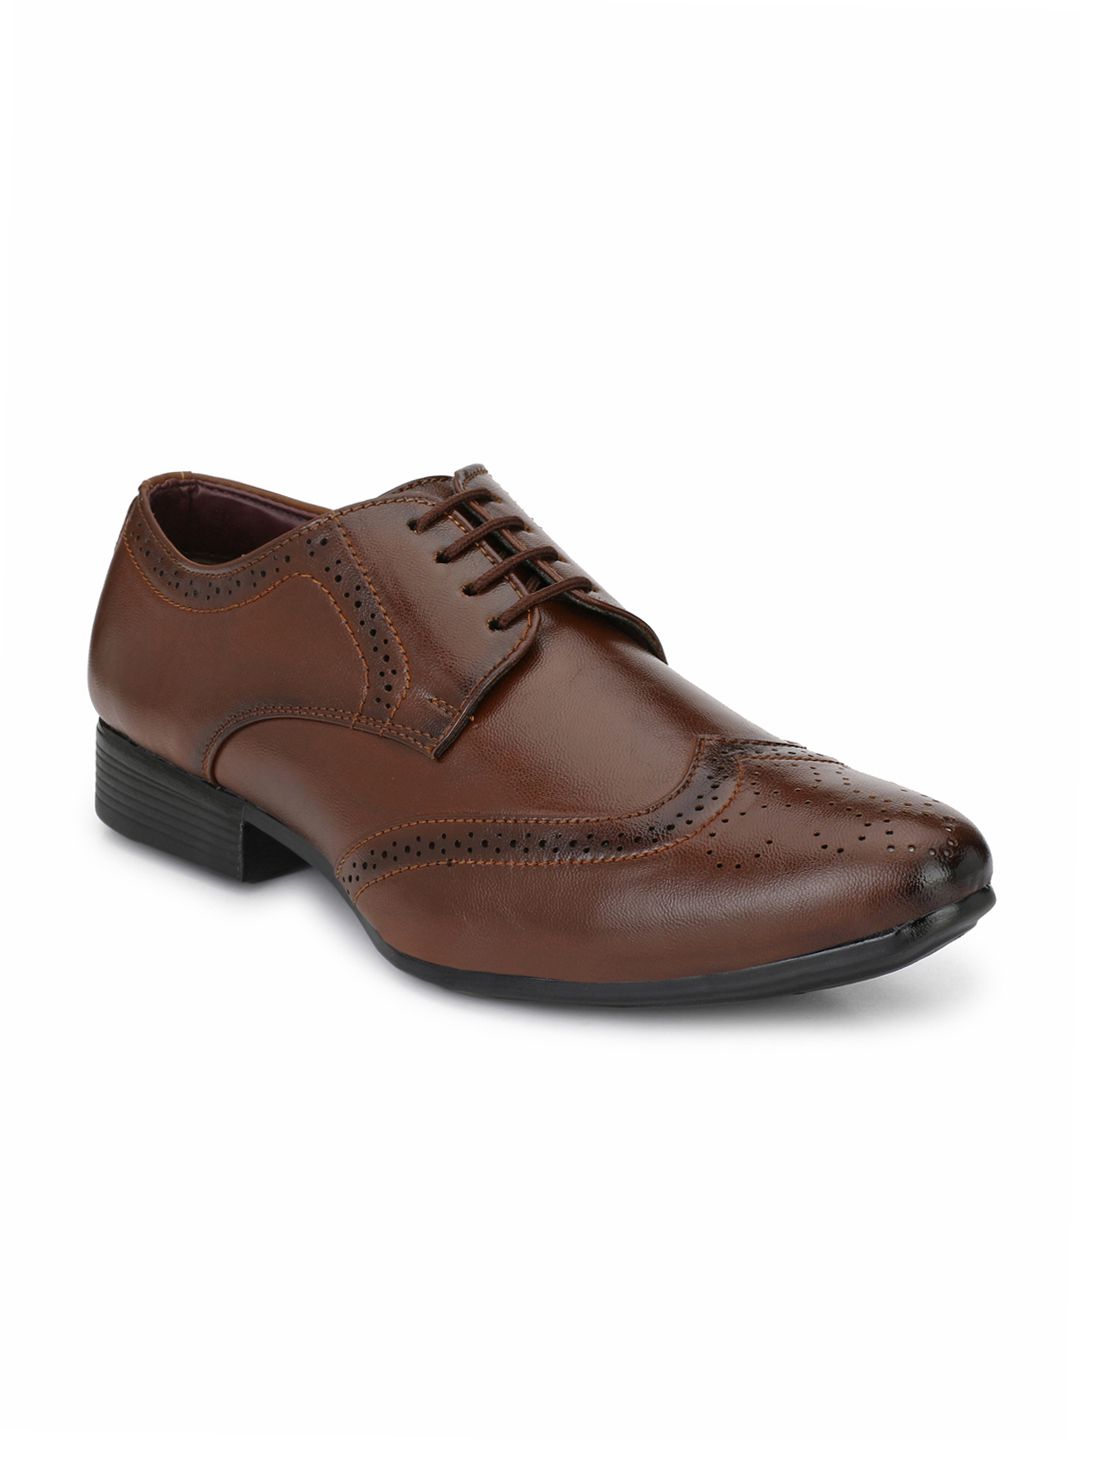 Mactree Brogue Artificial Leather Brown Formal Shoes Price in India ...